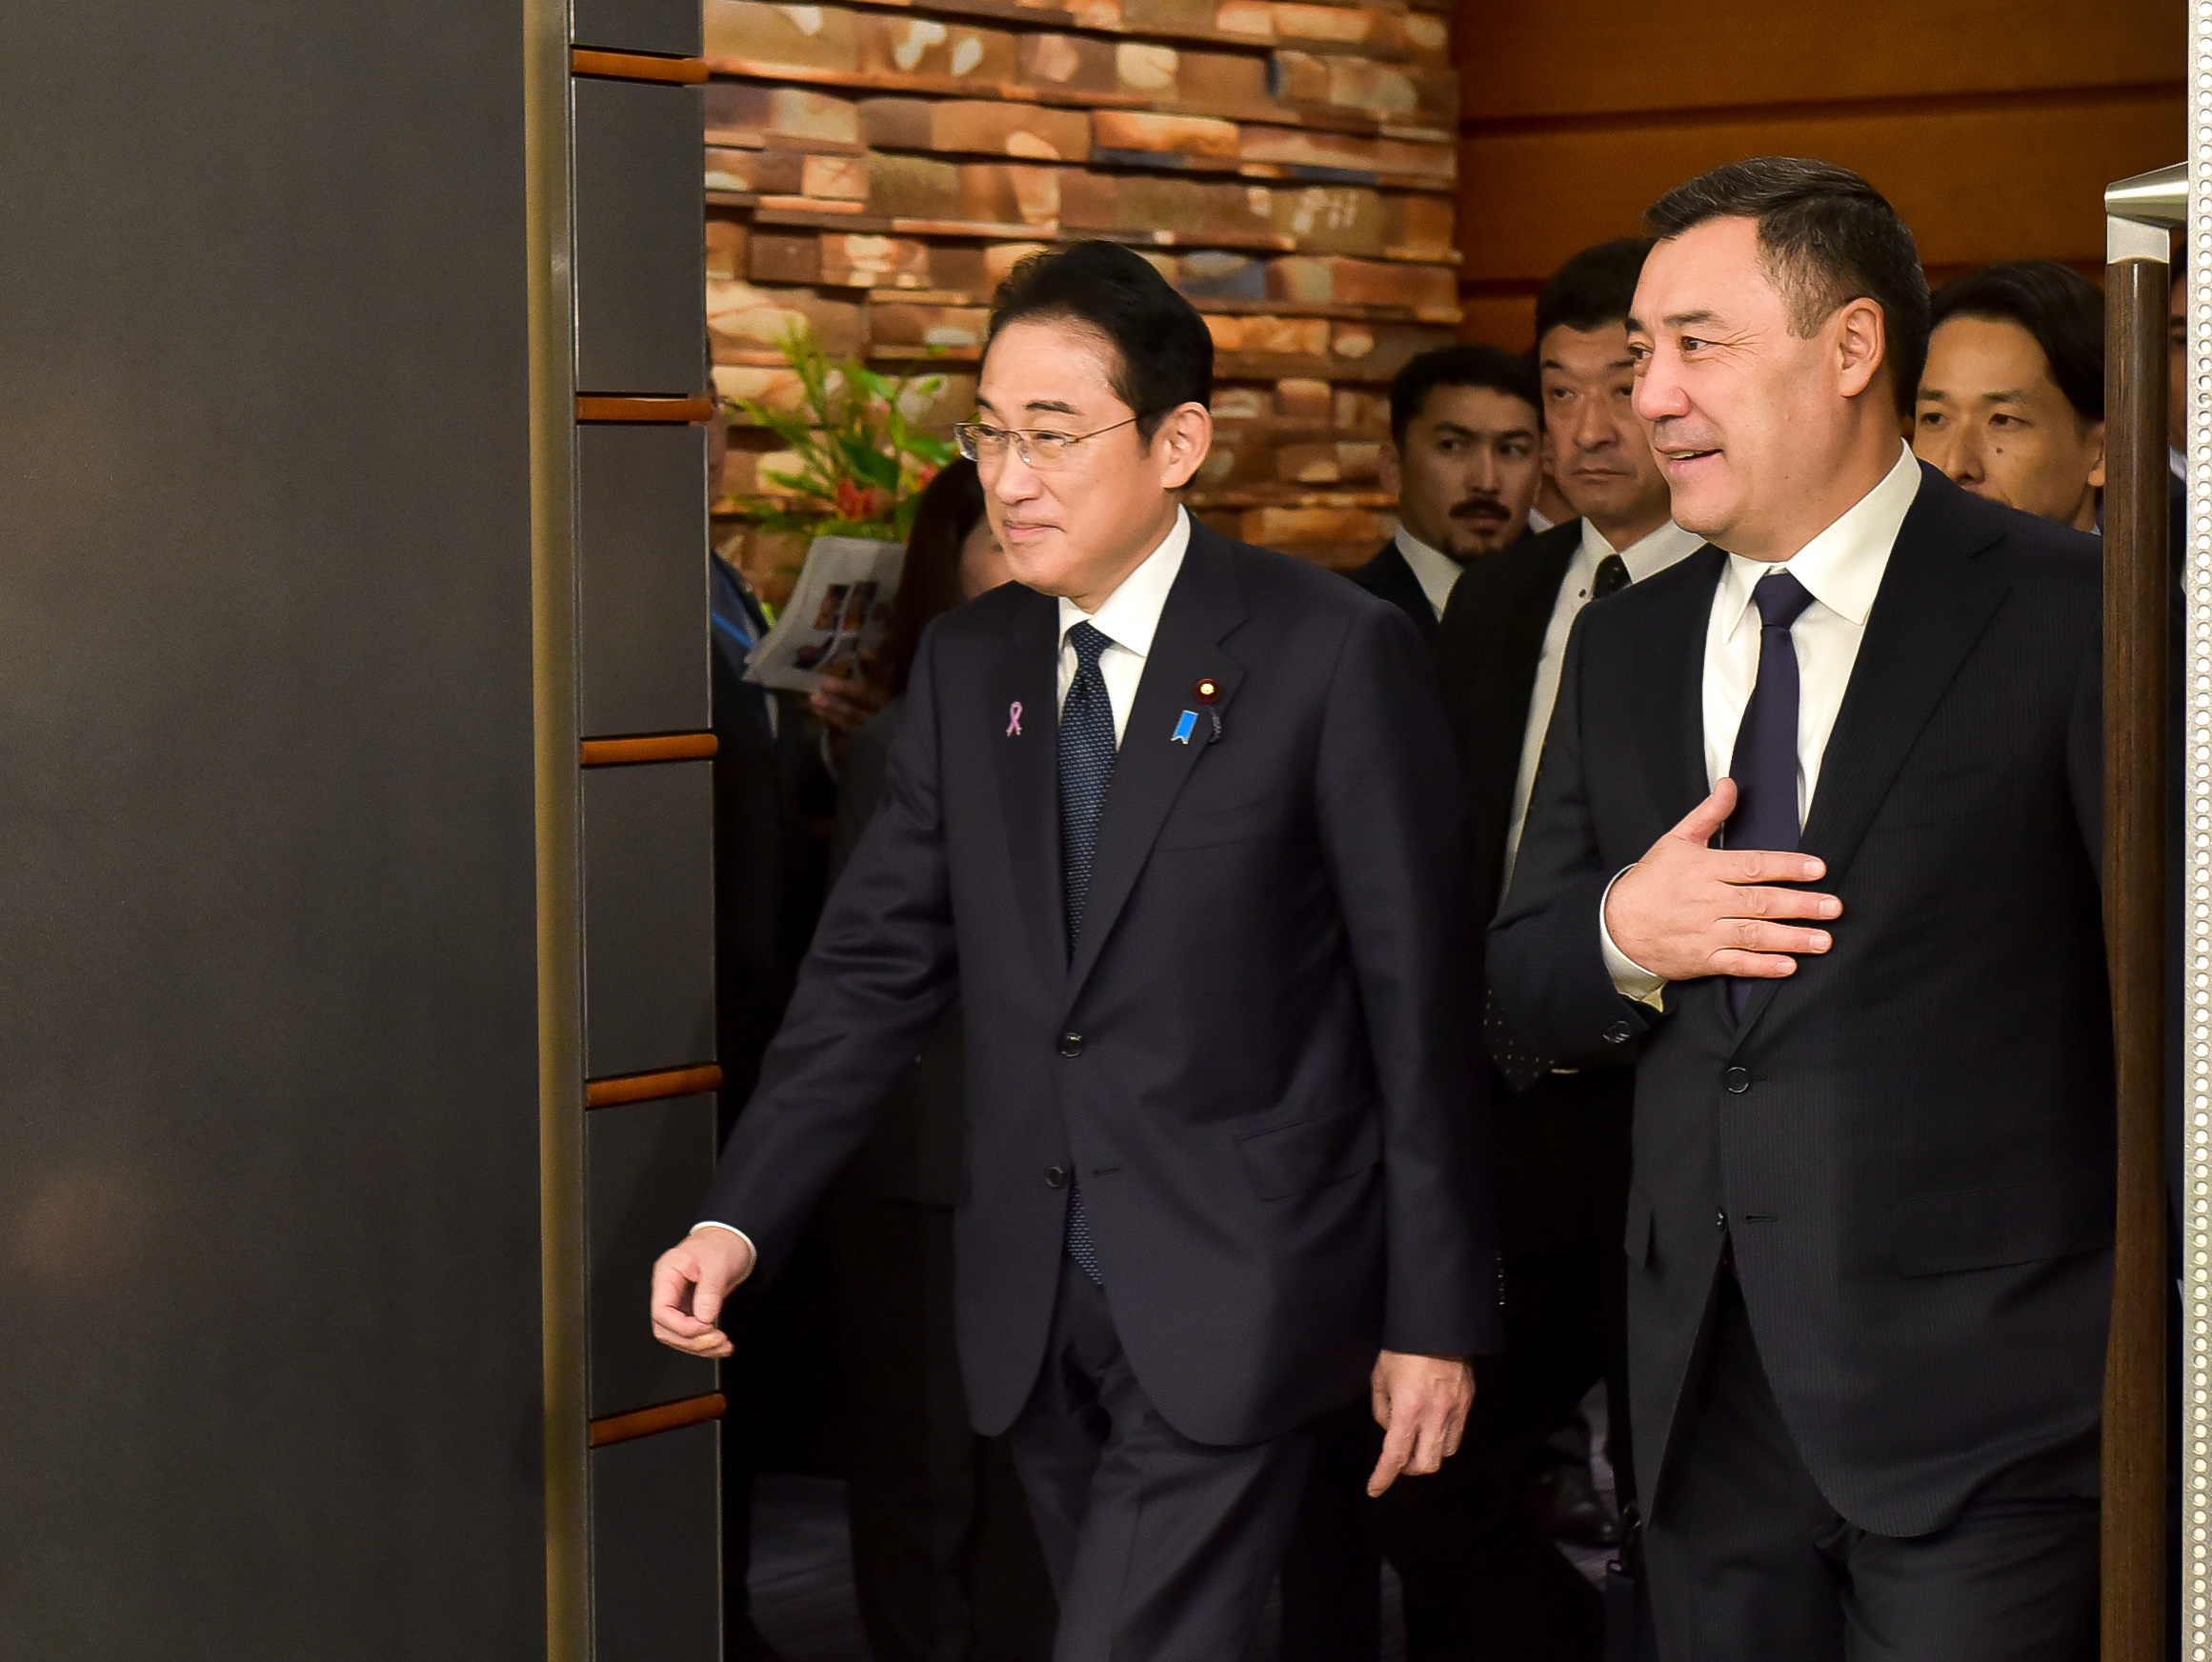  President of Kyrgyzstan boosts cooperation with Japan: joint statement signed in Tokyo